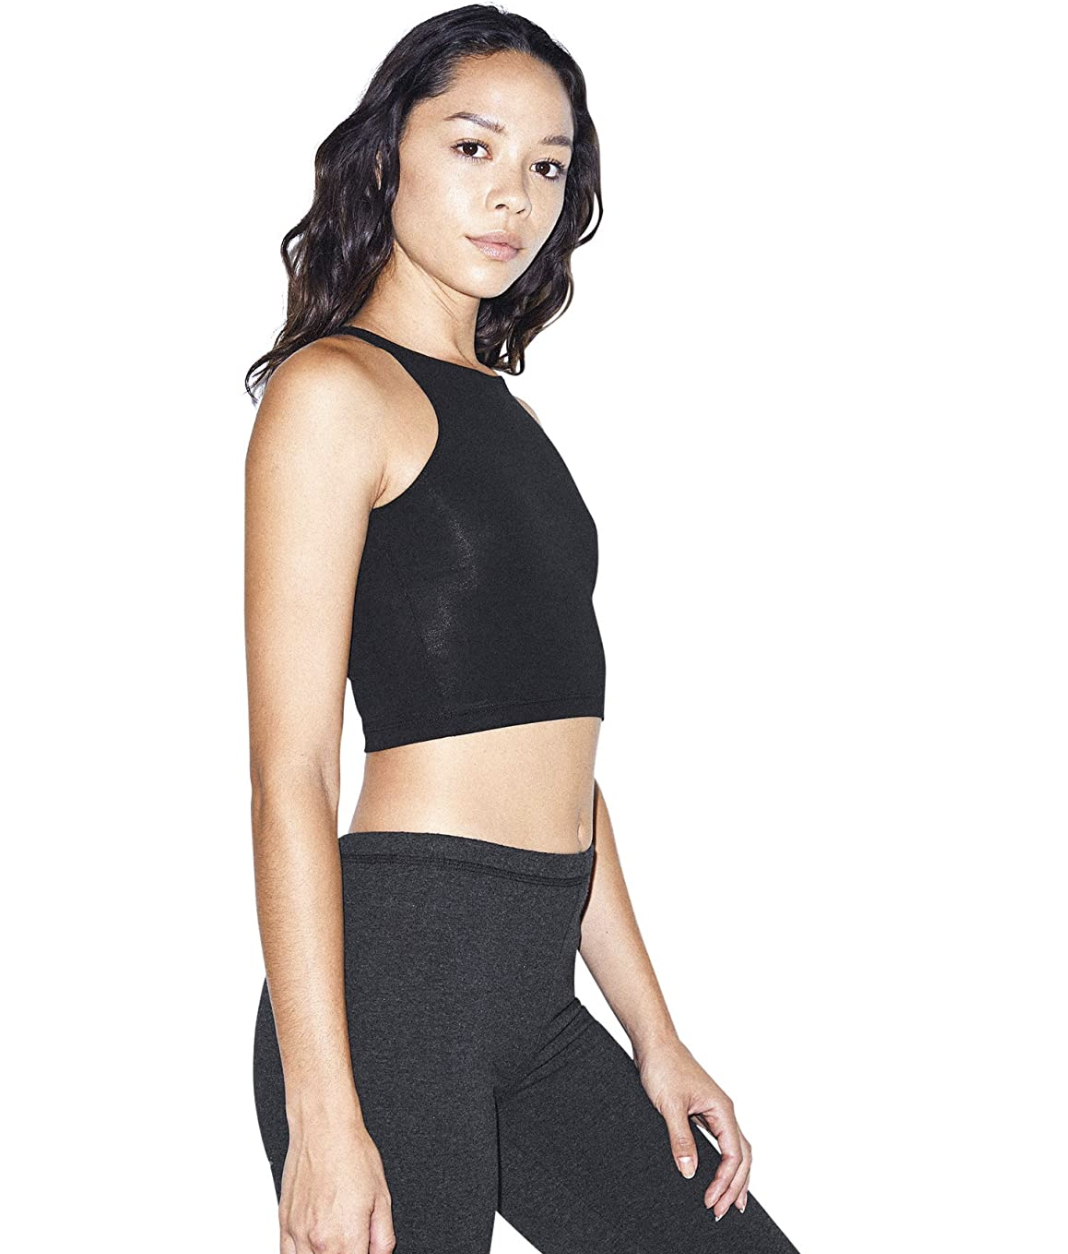 A model in a black compressive crop top that falls between the rib cage and belly button